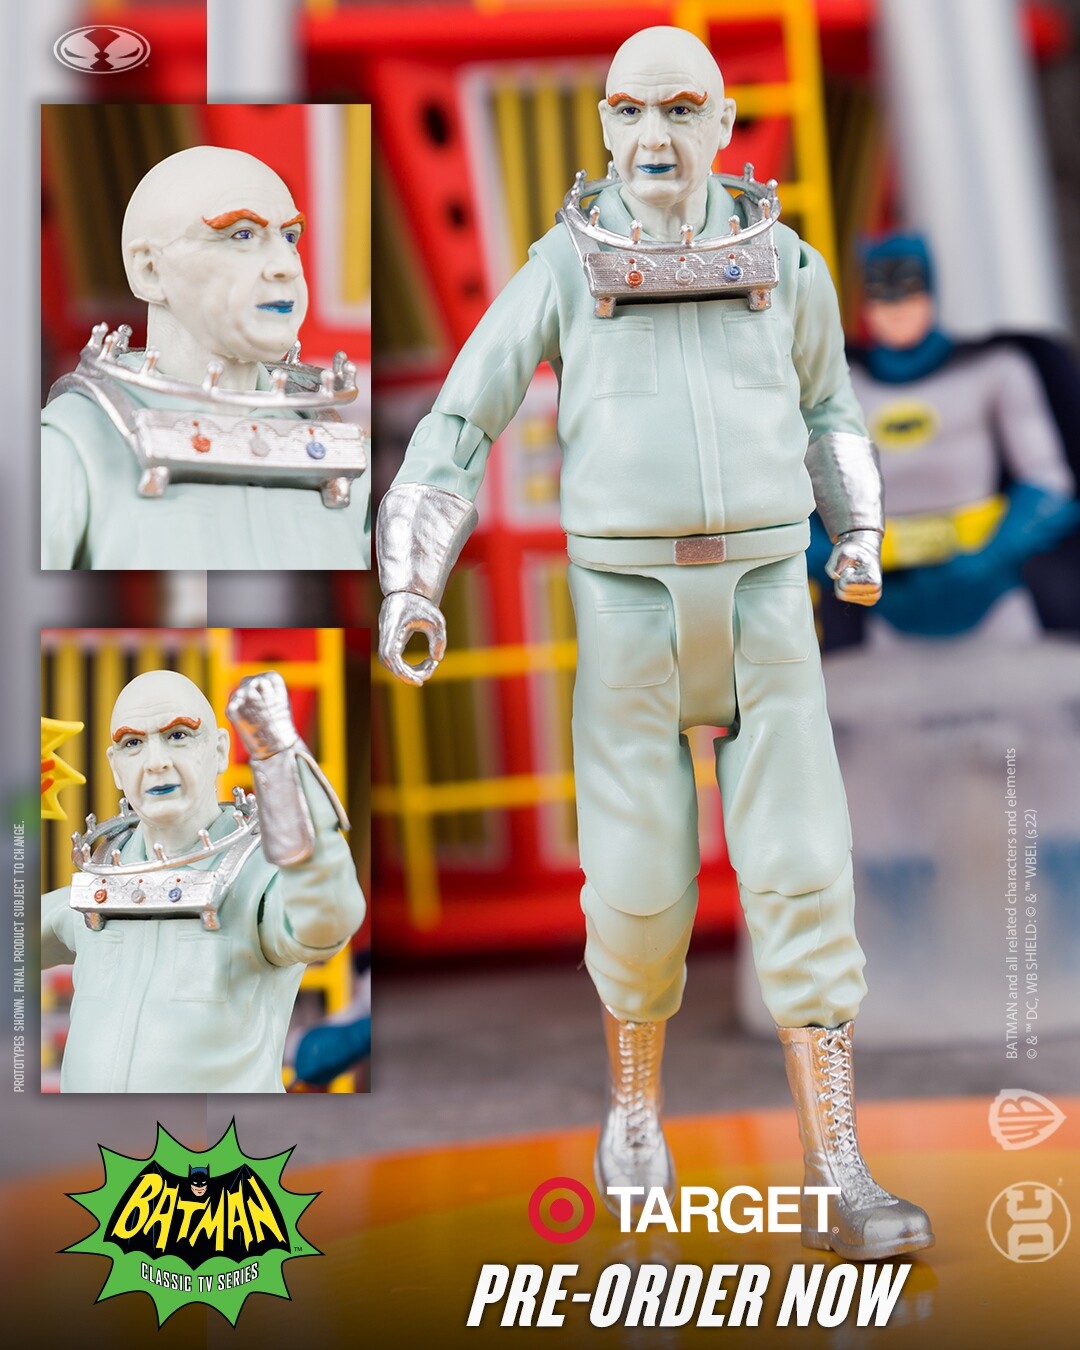 Batman 66 Mr Freeze - I helped with articulation engineering